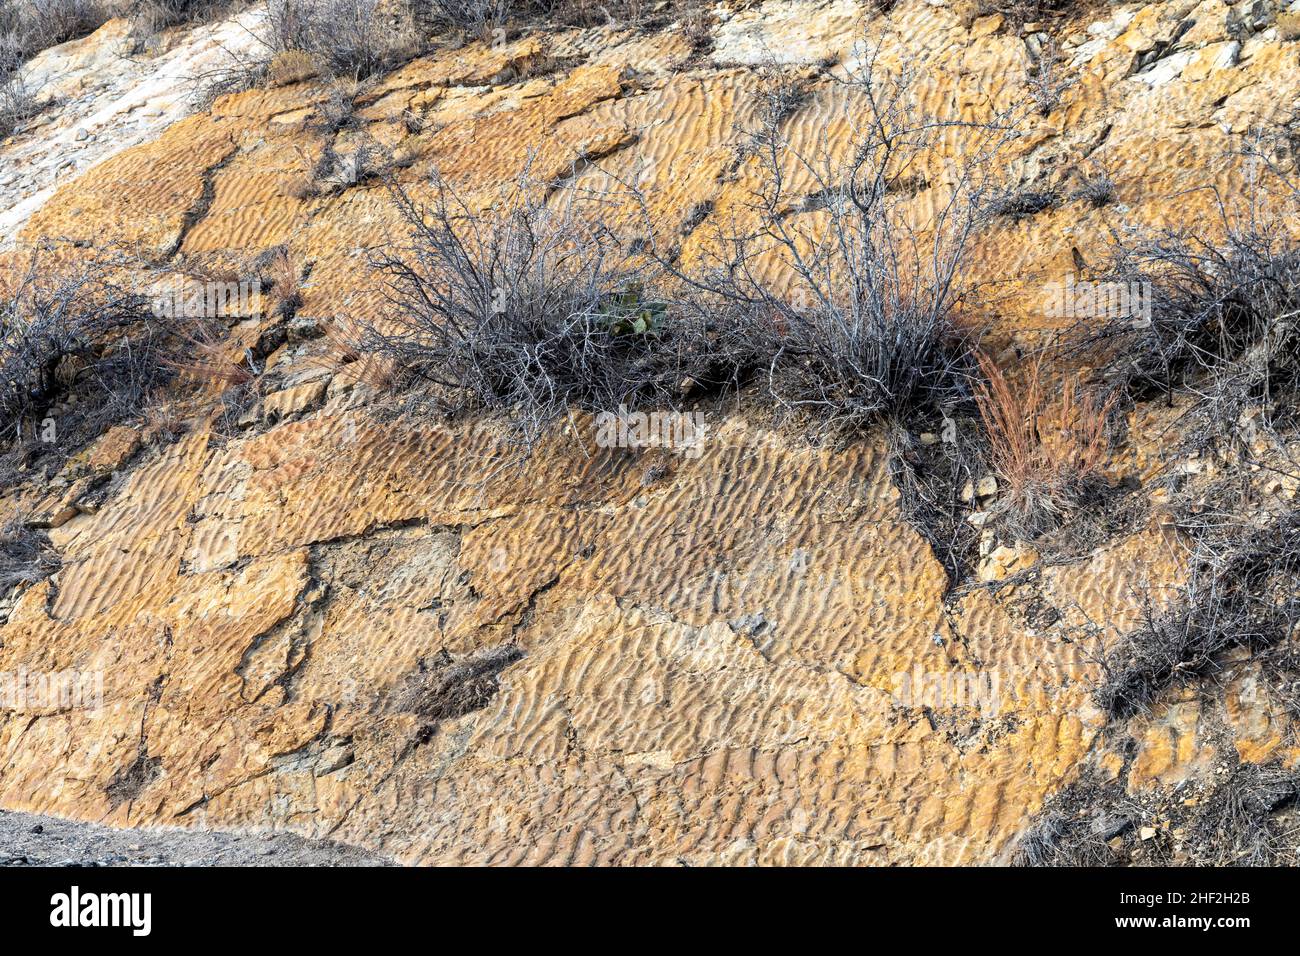 Morrison, Colorado - Wave ripple marks in the sandstone at Dinosaur Ridge. The ripple marks were left 100 million years ago when the area was a beach. Stock Photo